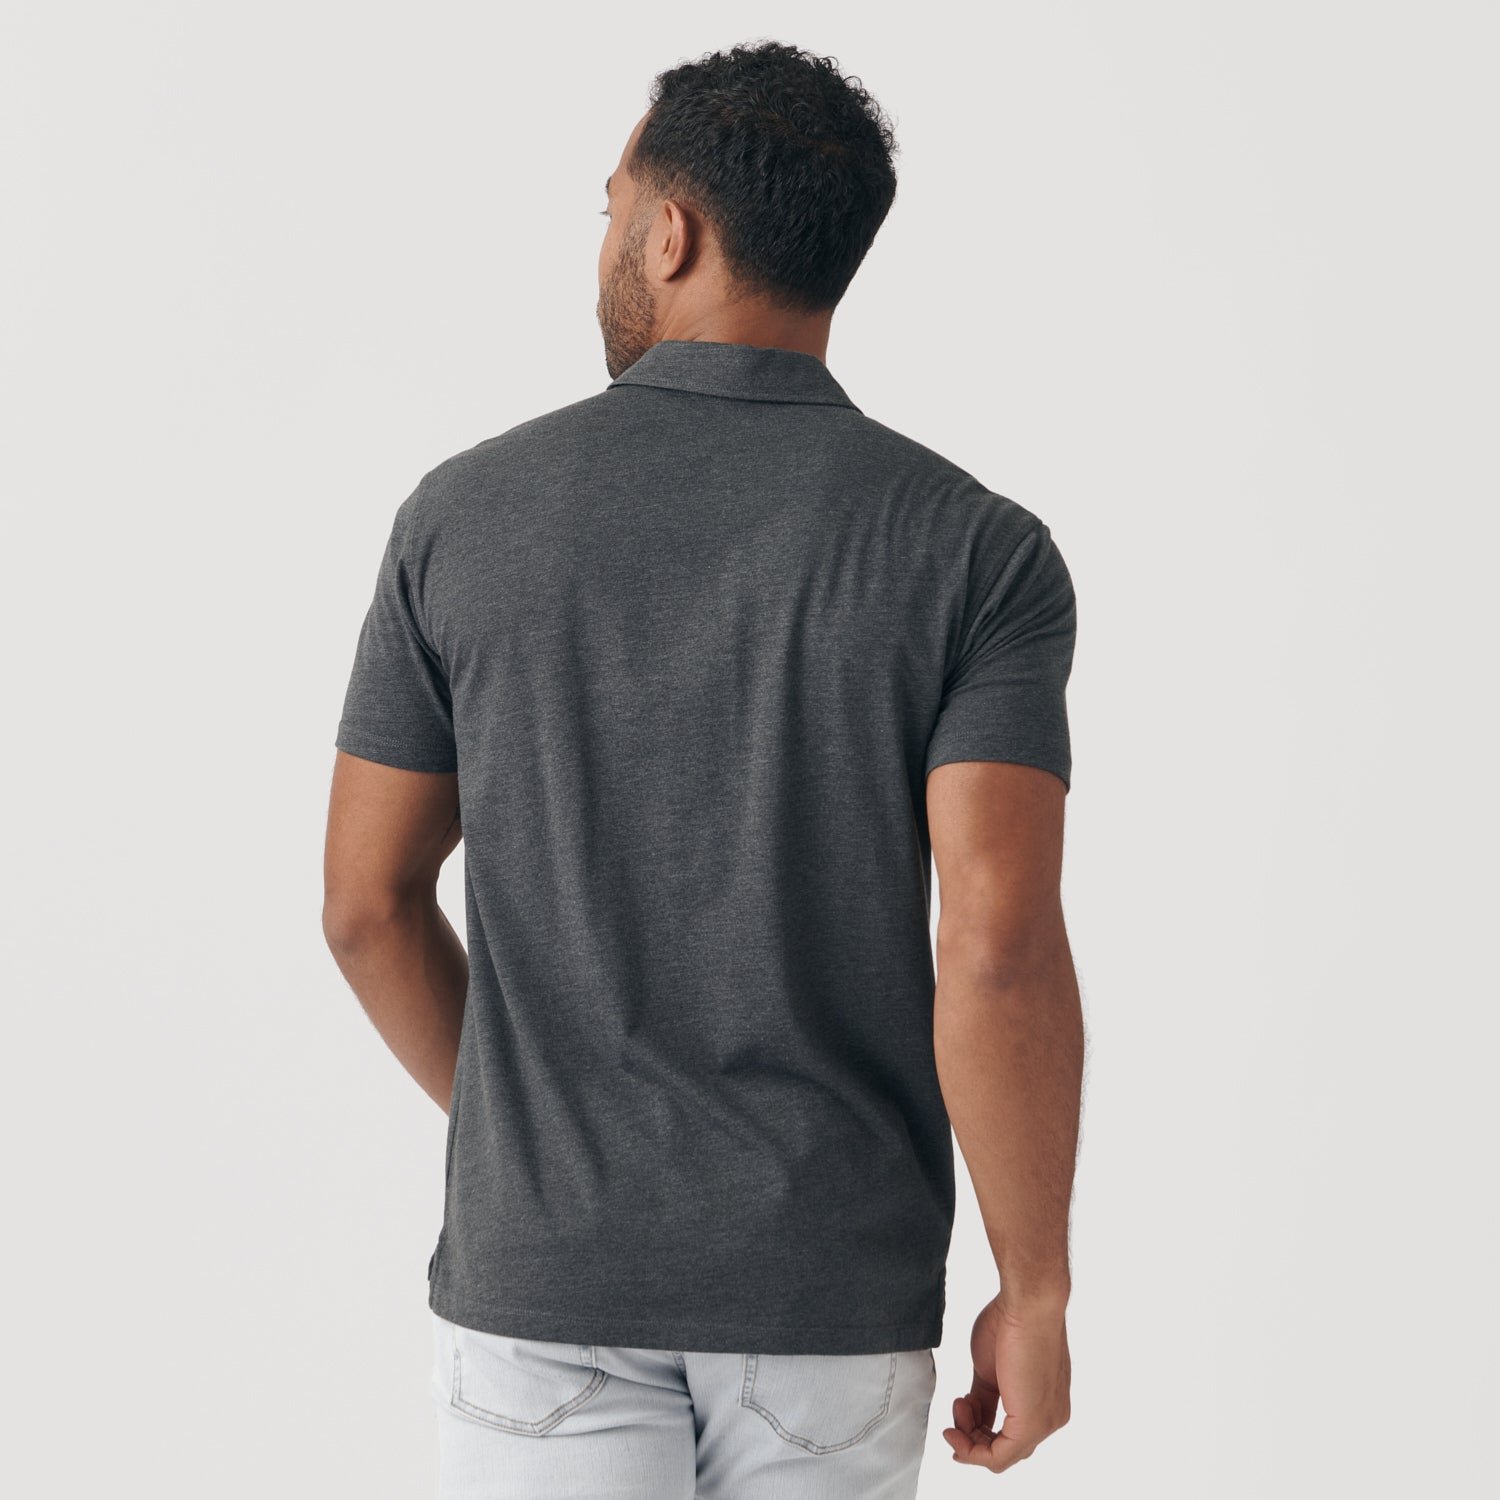 The Staple Heather Polo 6-Pack